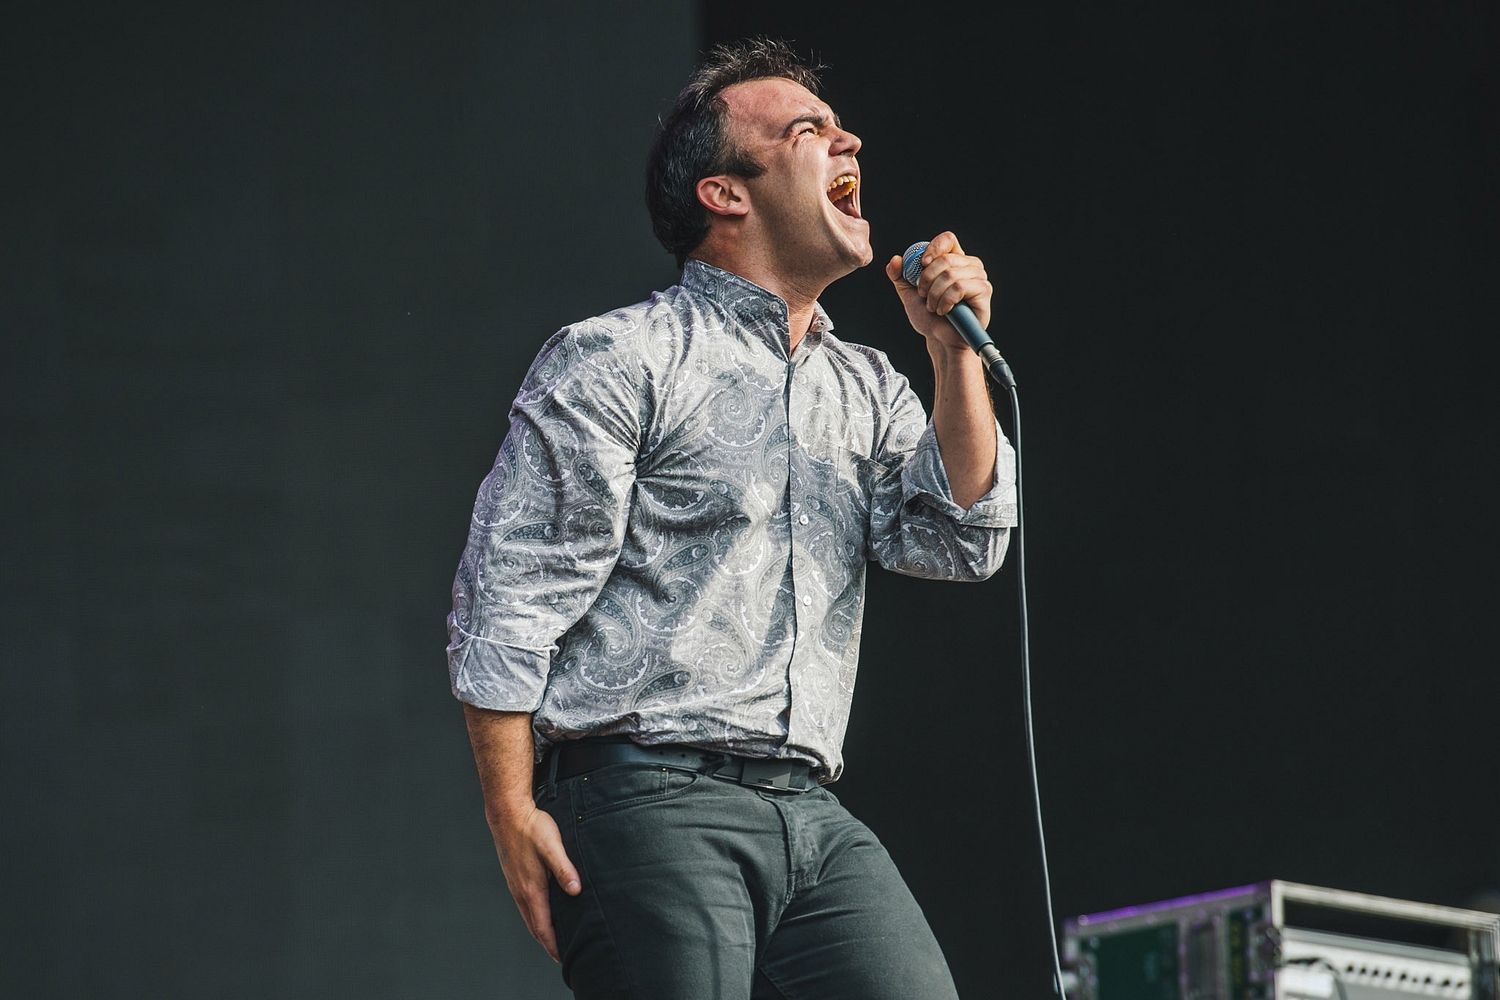 Watch Future Islands play new song ‘Aladdin’ live in Chicago